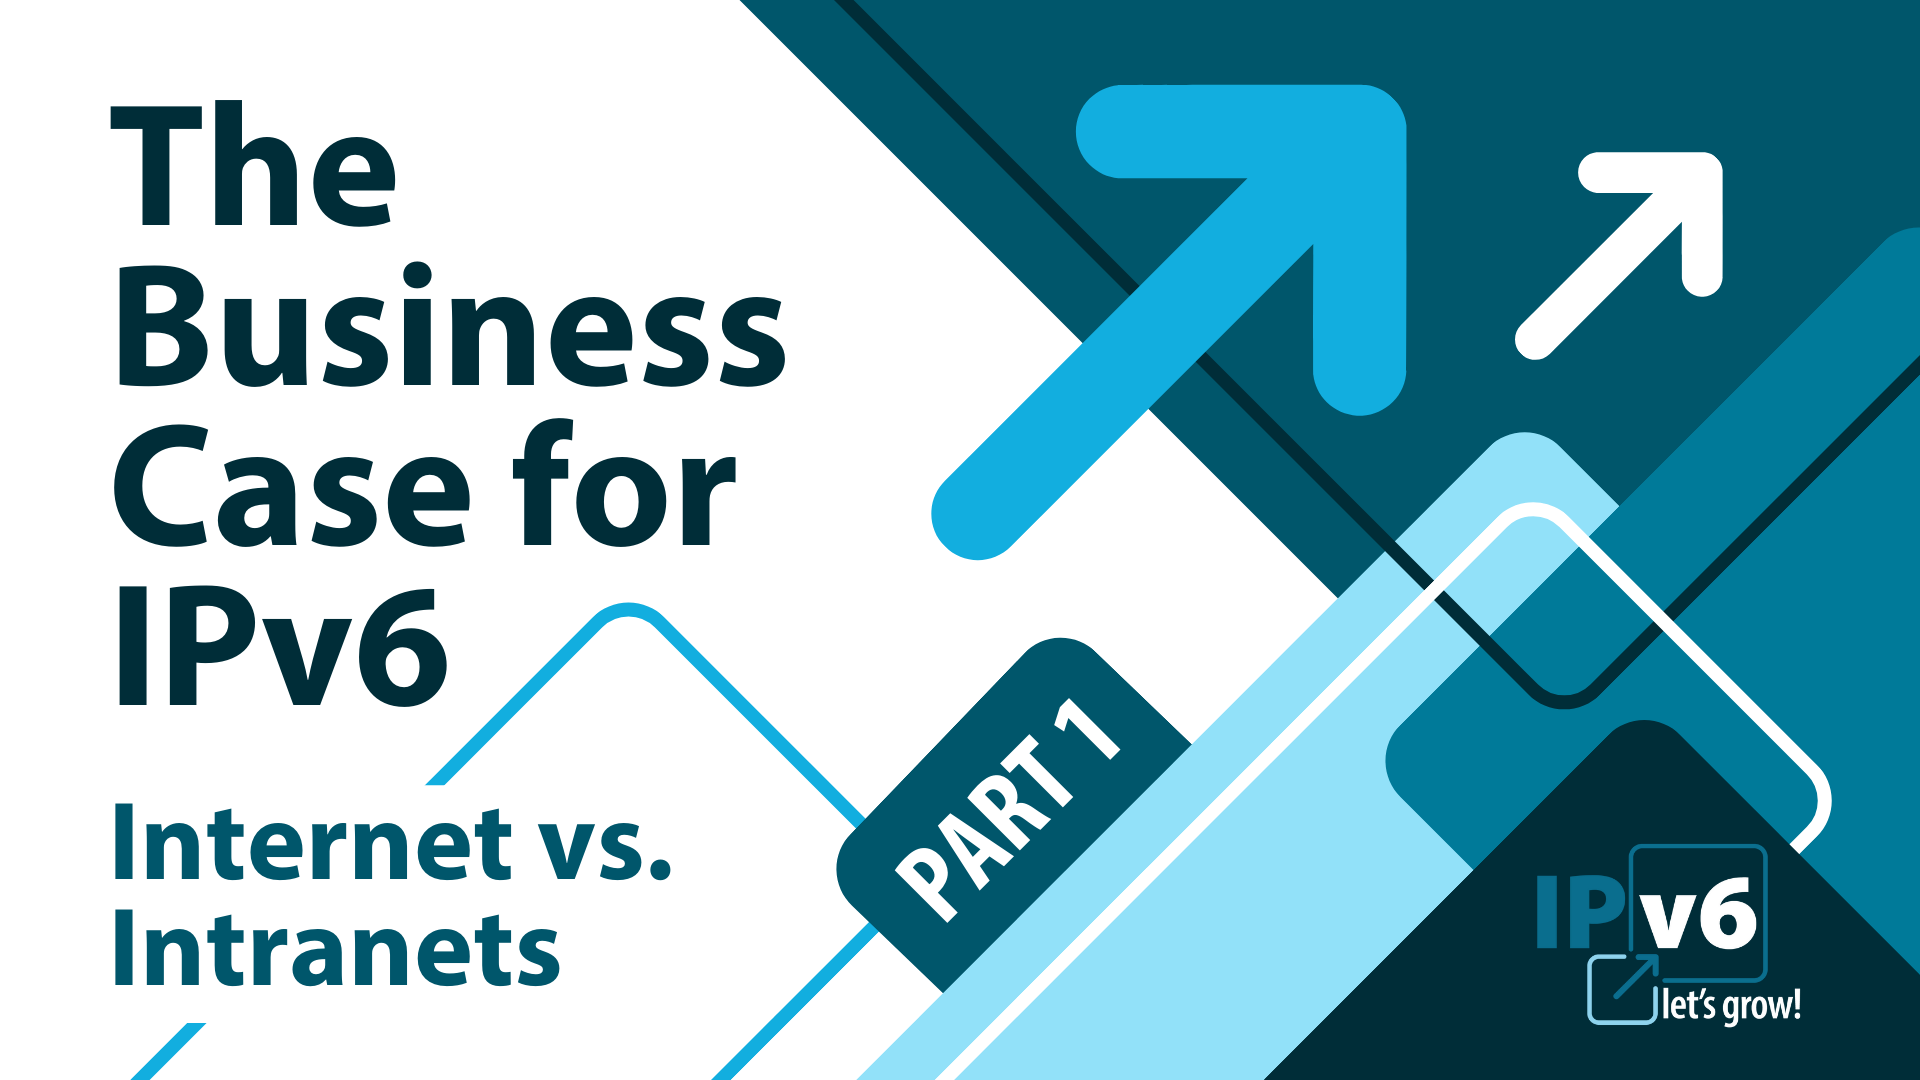 The Business Case for IPv6: Internet vs. Intranets